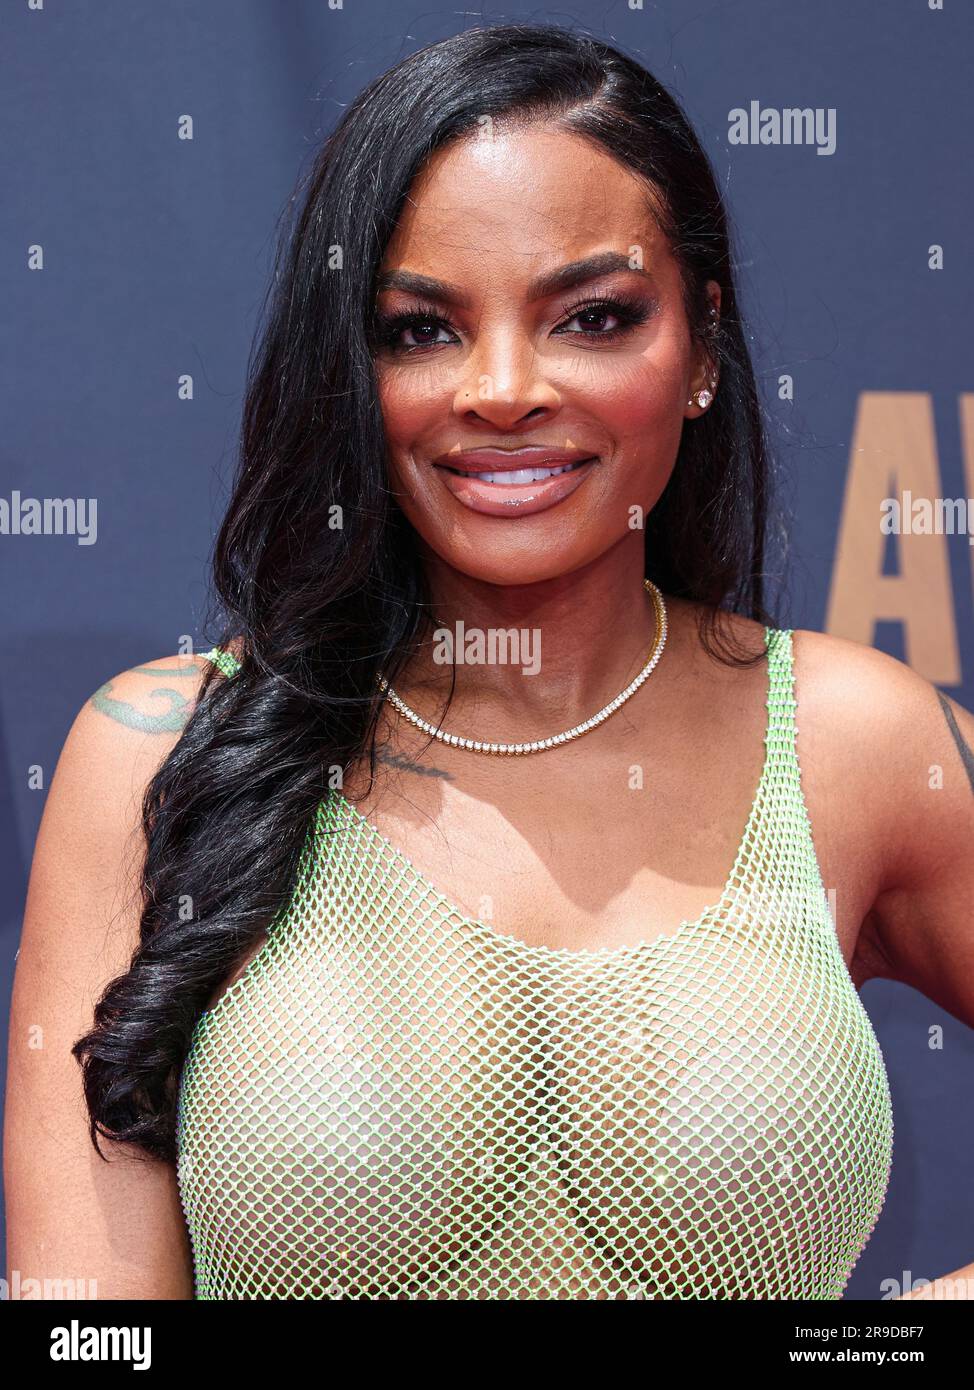 LOS ANGELES, CALIFORNIA, USA - JUNE 25: Brooke Bailey arrives at the BET Awards 2023 held at Microsoft Theater at L.A. Live on June 25, 2023 in Los Angeles, California, United States. (Photo by Xavier Collin/Image Press Agency) Stock Photo